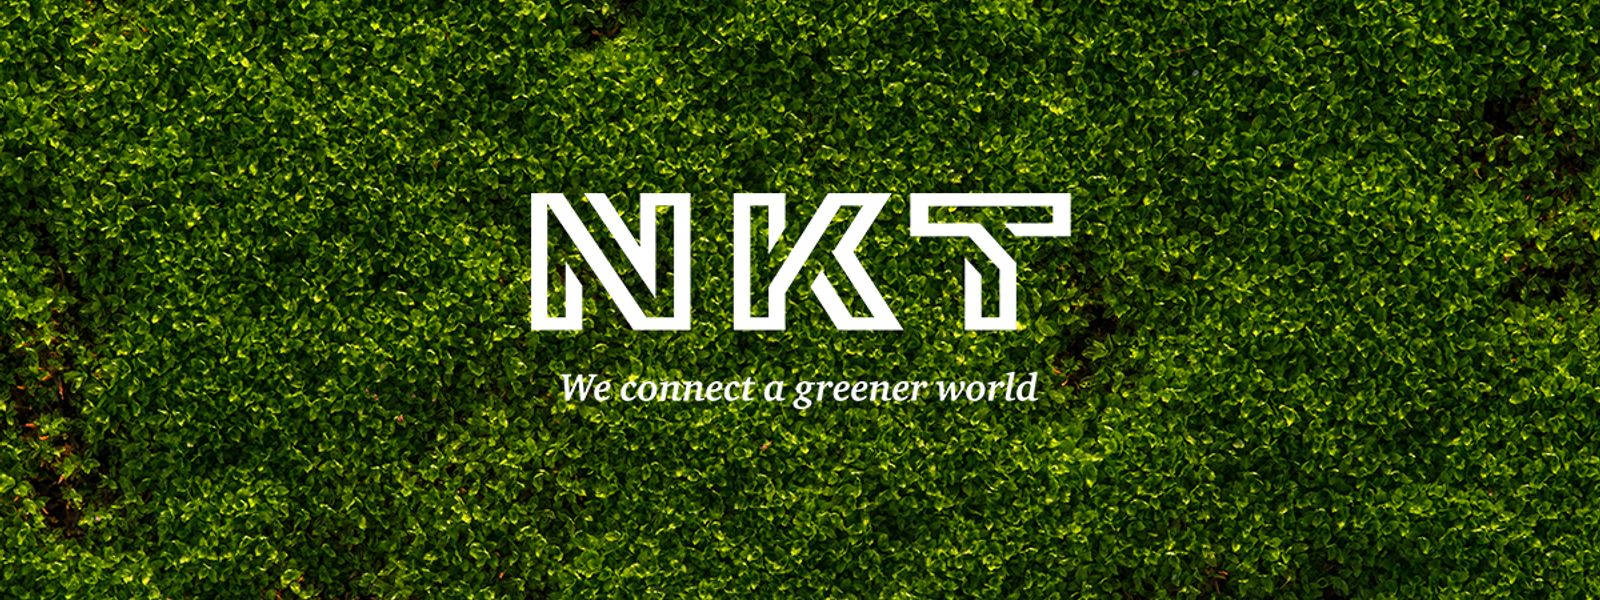 NKT We connect a greener world logo green leaves background